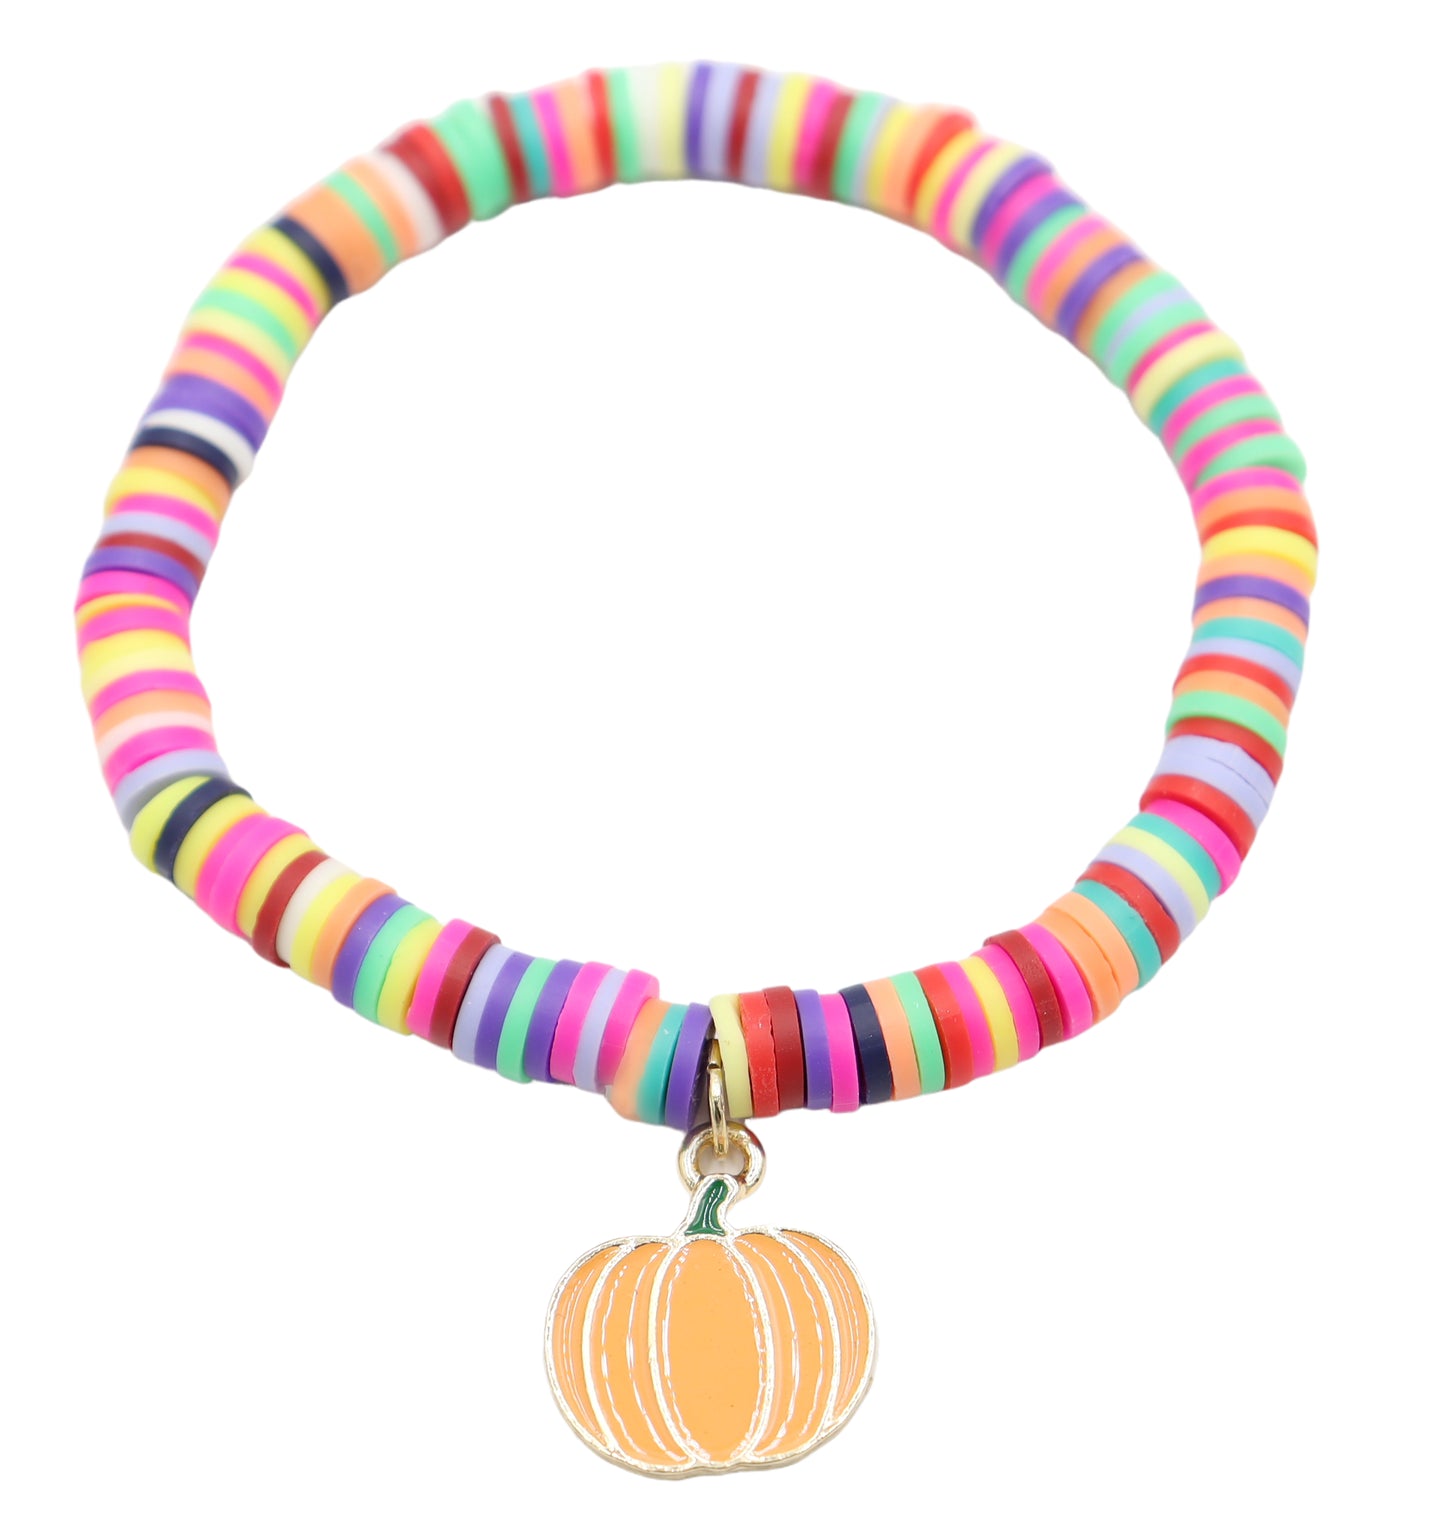 Bright Colorful Party Pumpkin Patch Polymer Clay and Metallic Pumpkin Charm Stretch Bracelet by Monkey's Mojo